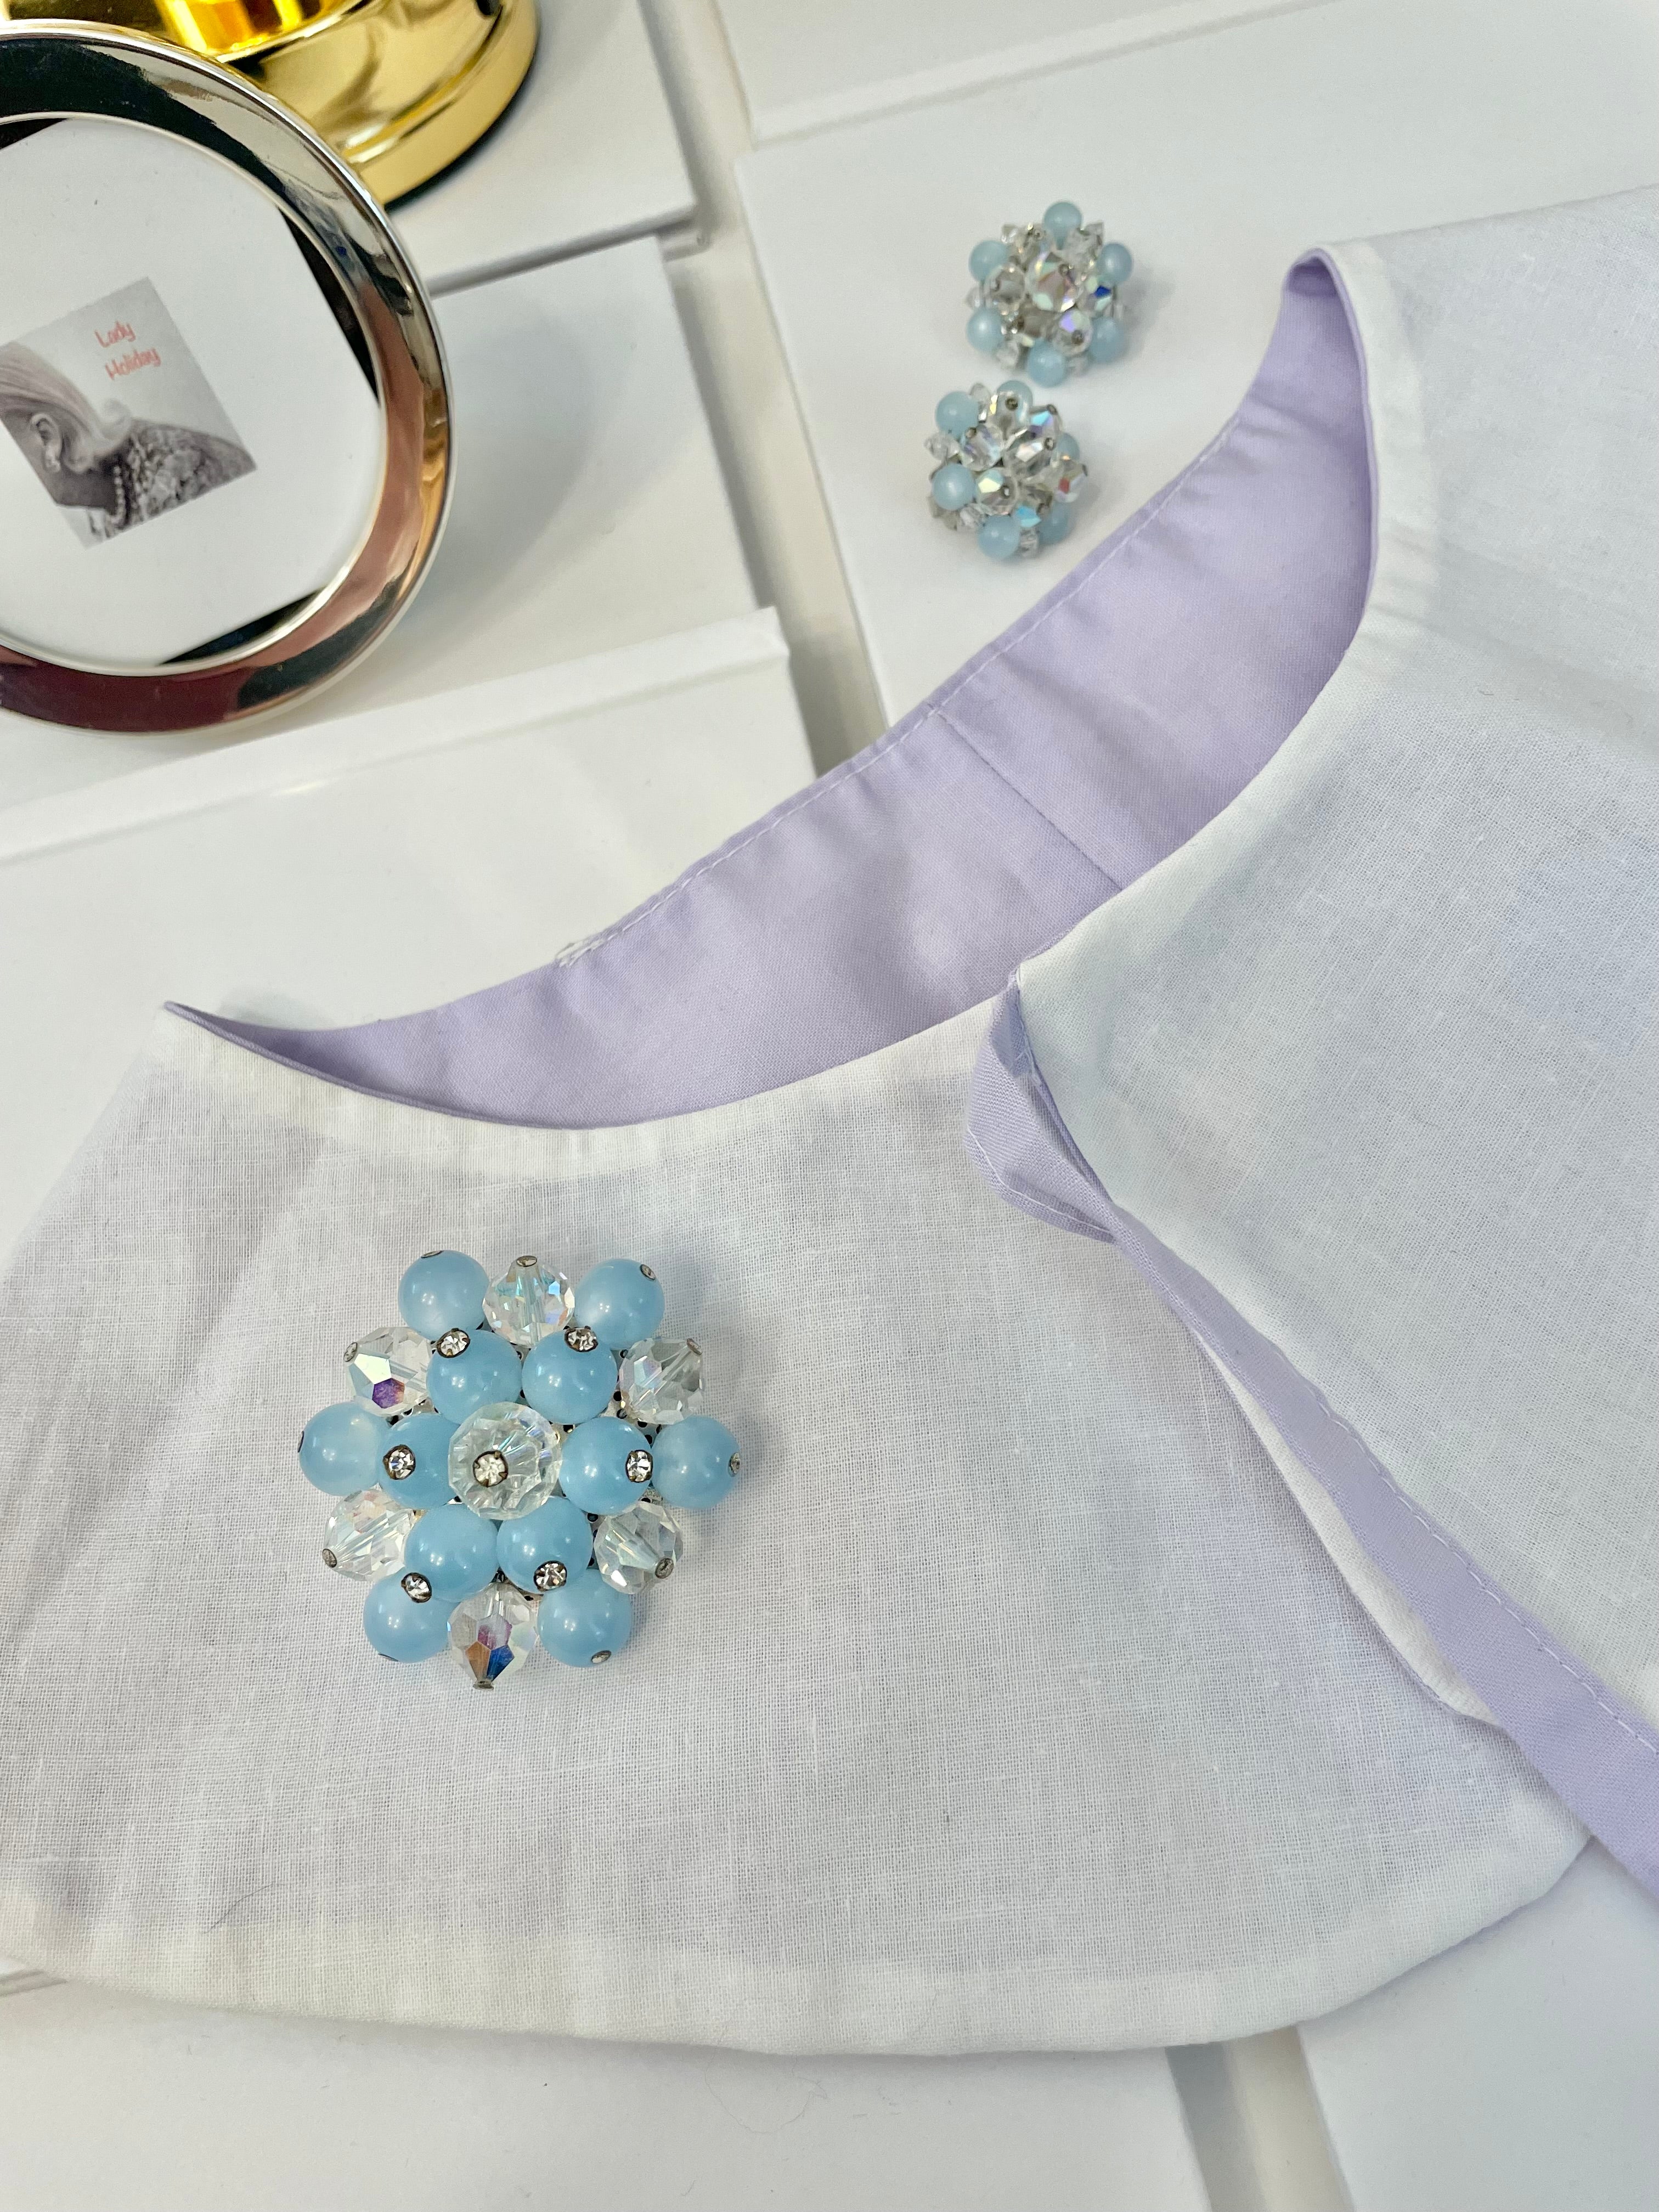 1960's Heiress and her love of the classic brooch, and matching earrings. Oh my! The soft blue with Austrian crystals is truly divine.